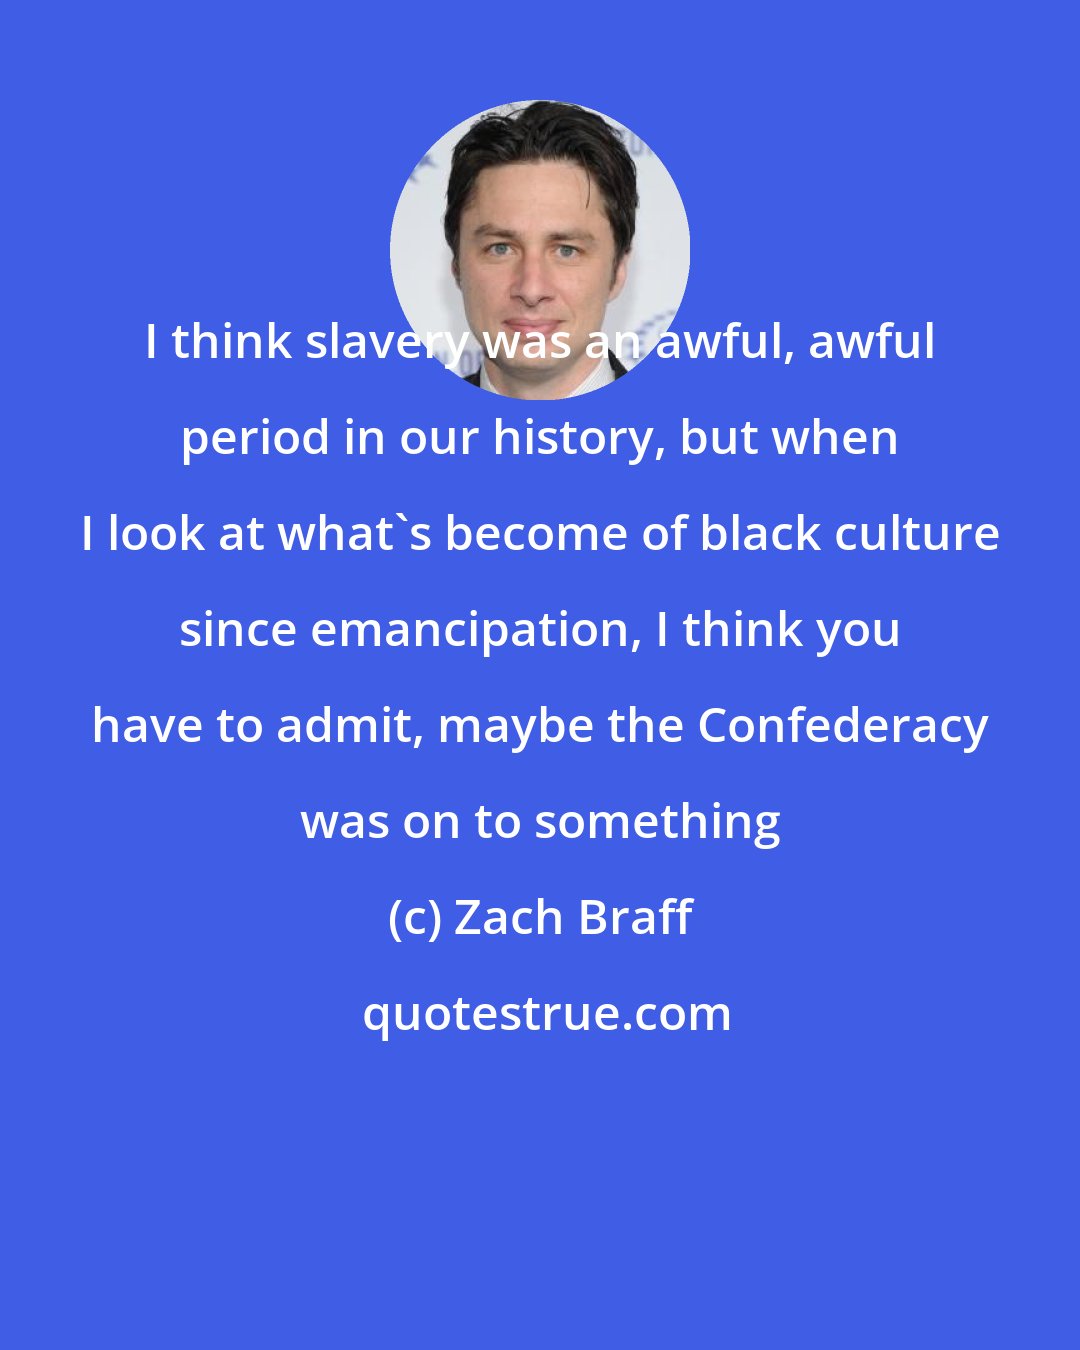 Zach Braff: I think slavery was an awful, awful period in our history, but when I look at what's become of black culture since emancipation, I think you have to admit, maybe the Confederacy was on to something